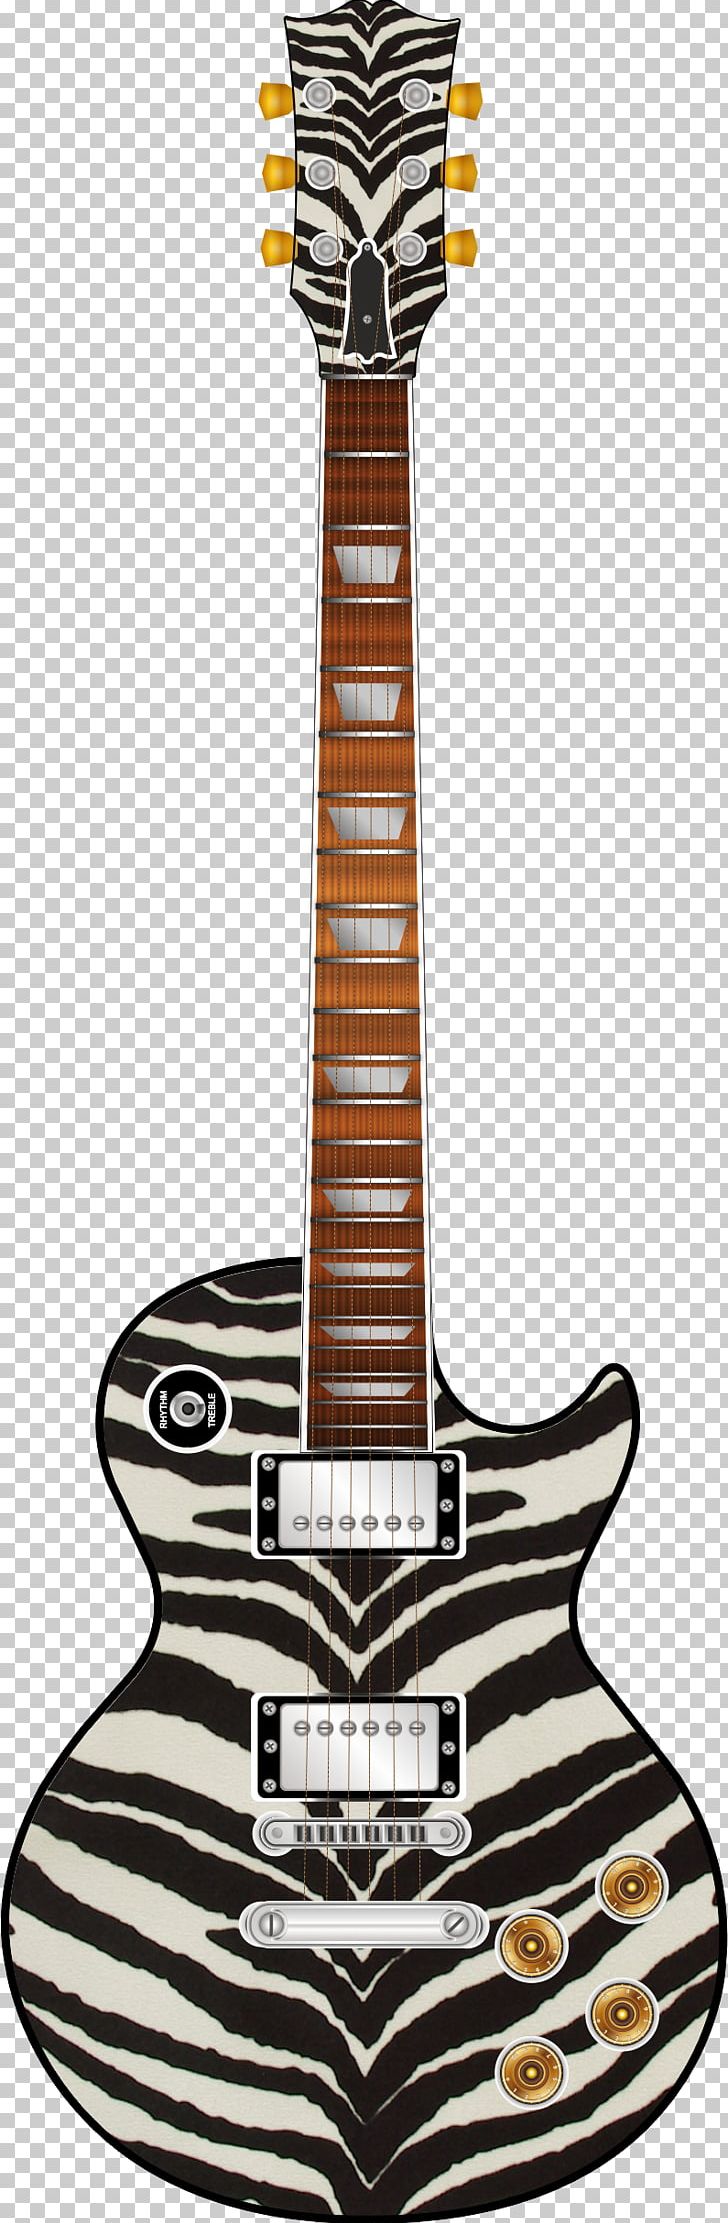 Tiple Acoustic Guitar Acoustic-electric Guitar IPhone 7 Cavaquinho PNG, Clipart, Acoustic, Acoustic Electric Guitar, Acousticelectric Guitar, Acoustic Music, Black And White Free PNG Download